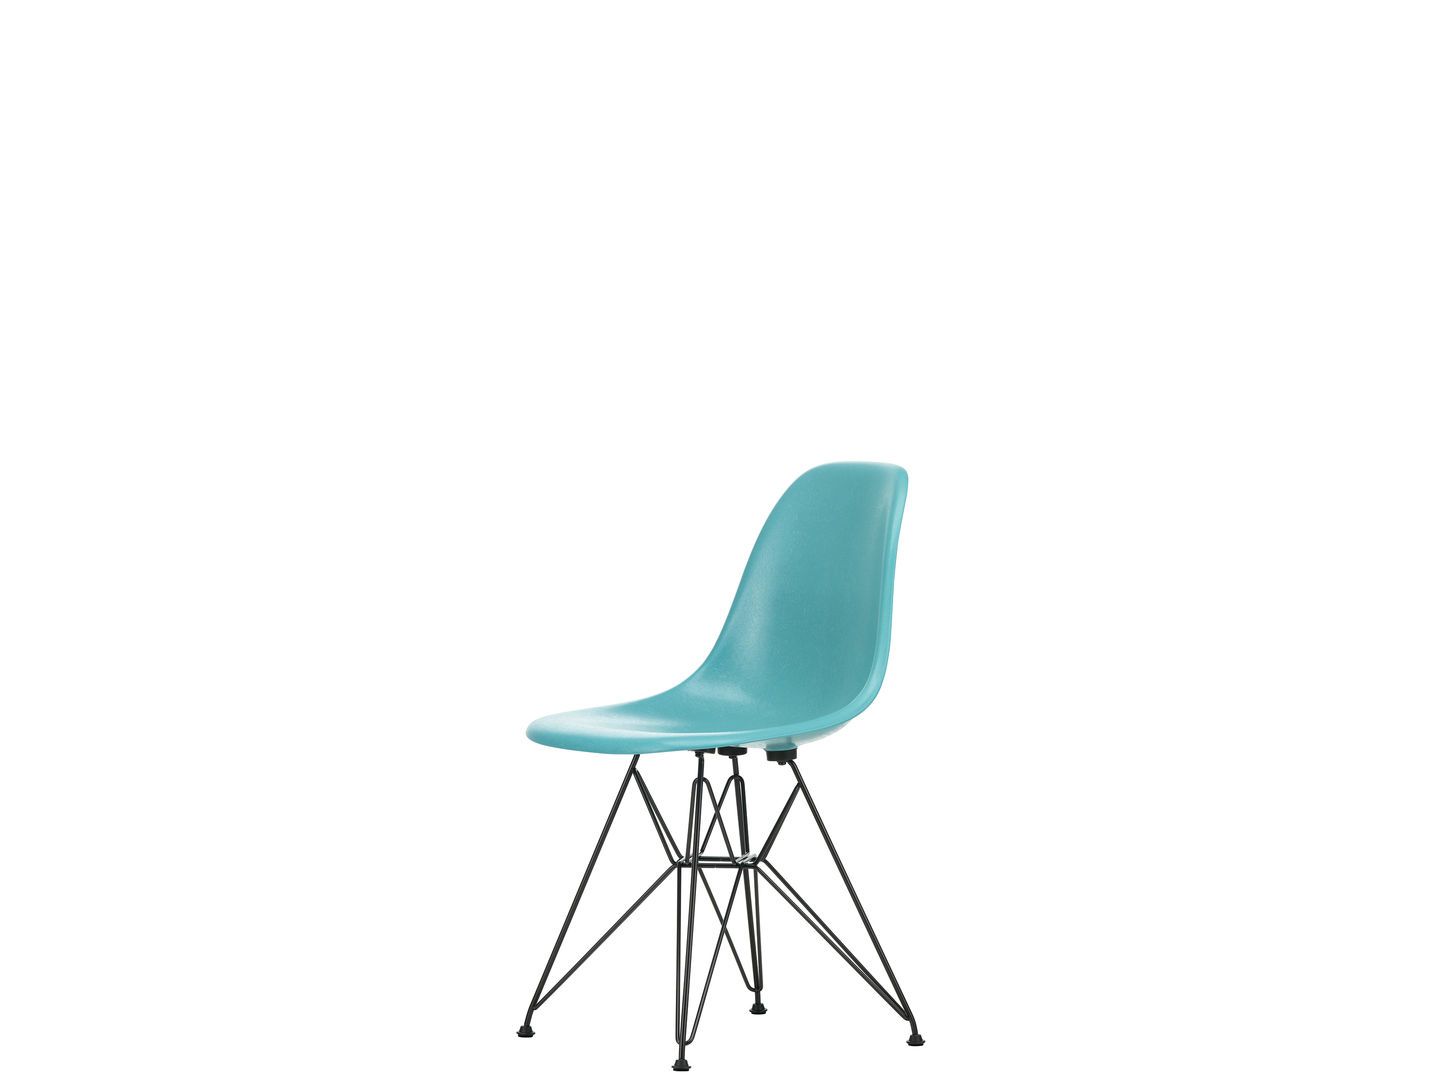 Eames Fiberglass Side Chair in vibrant turquoise color with sleek black wire base, a limited edition piece by Vitra.